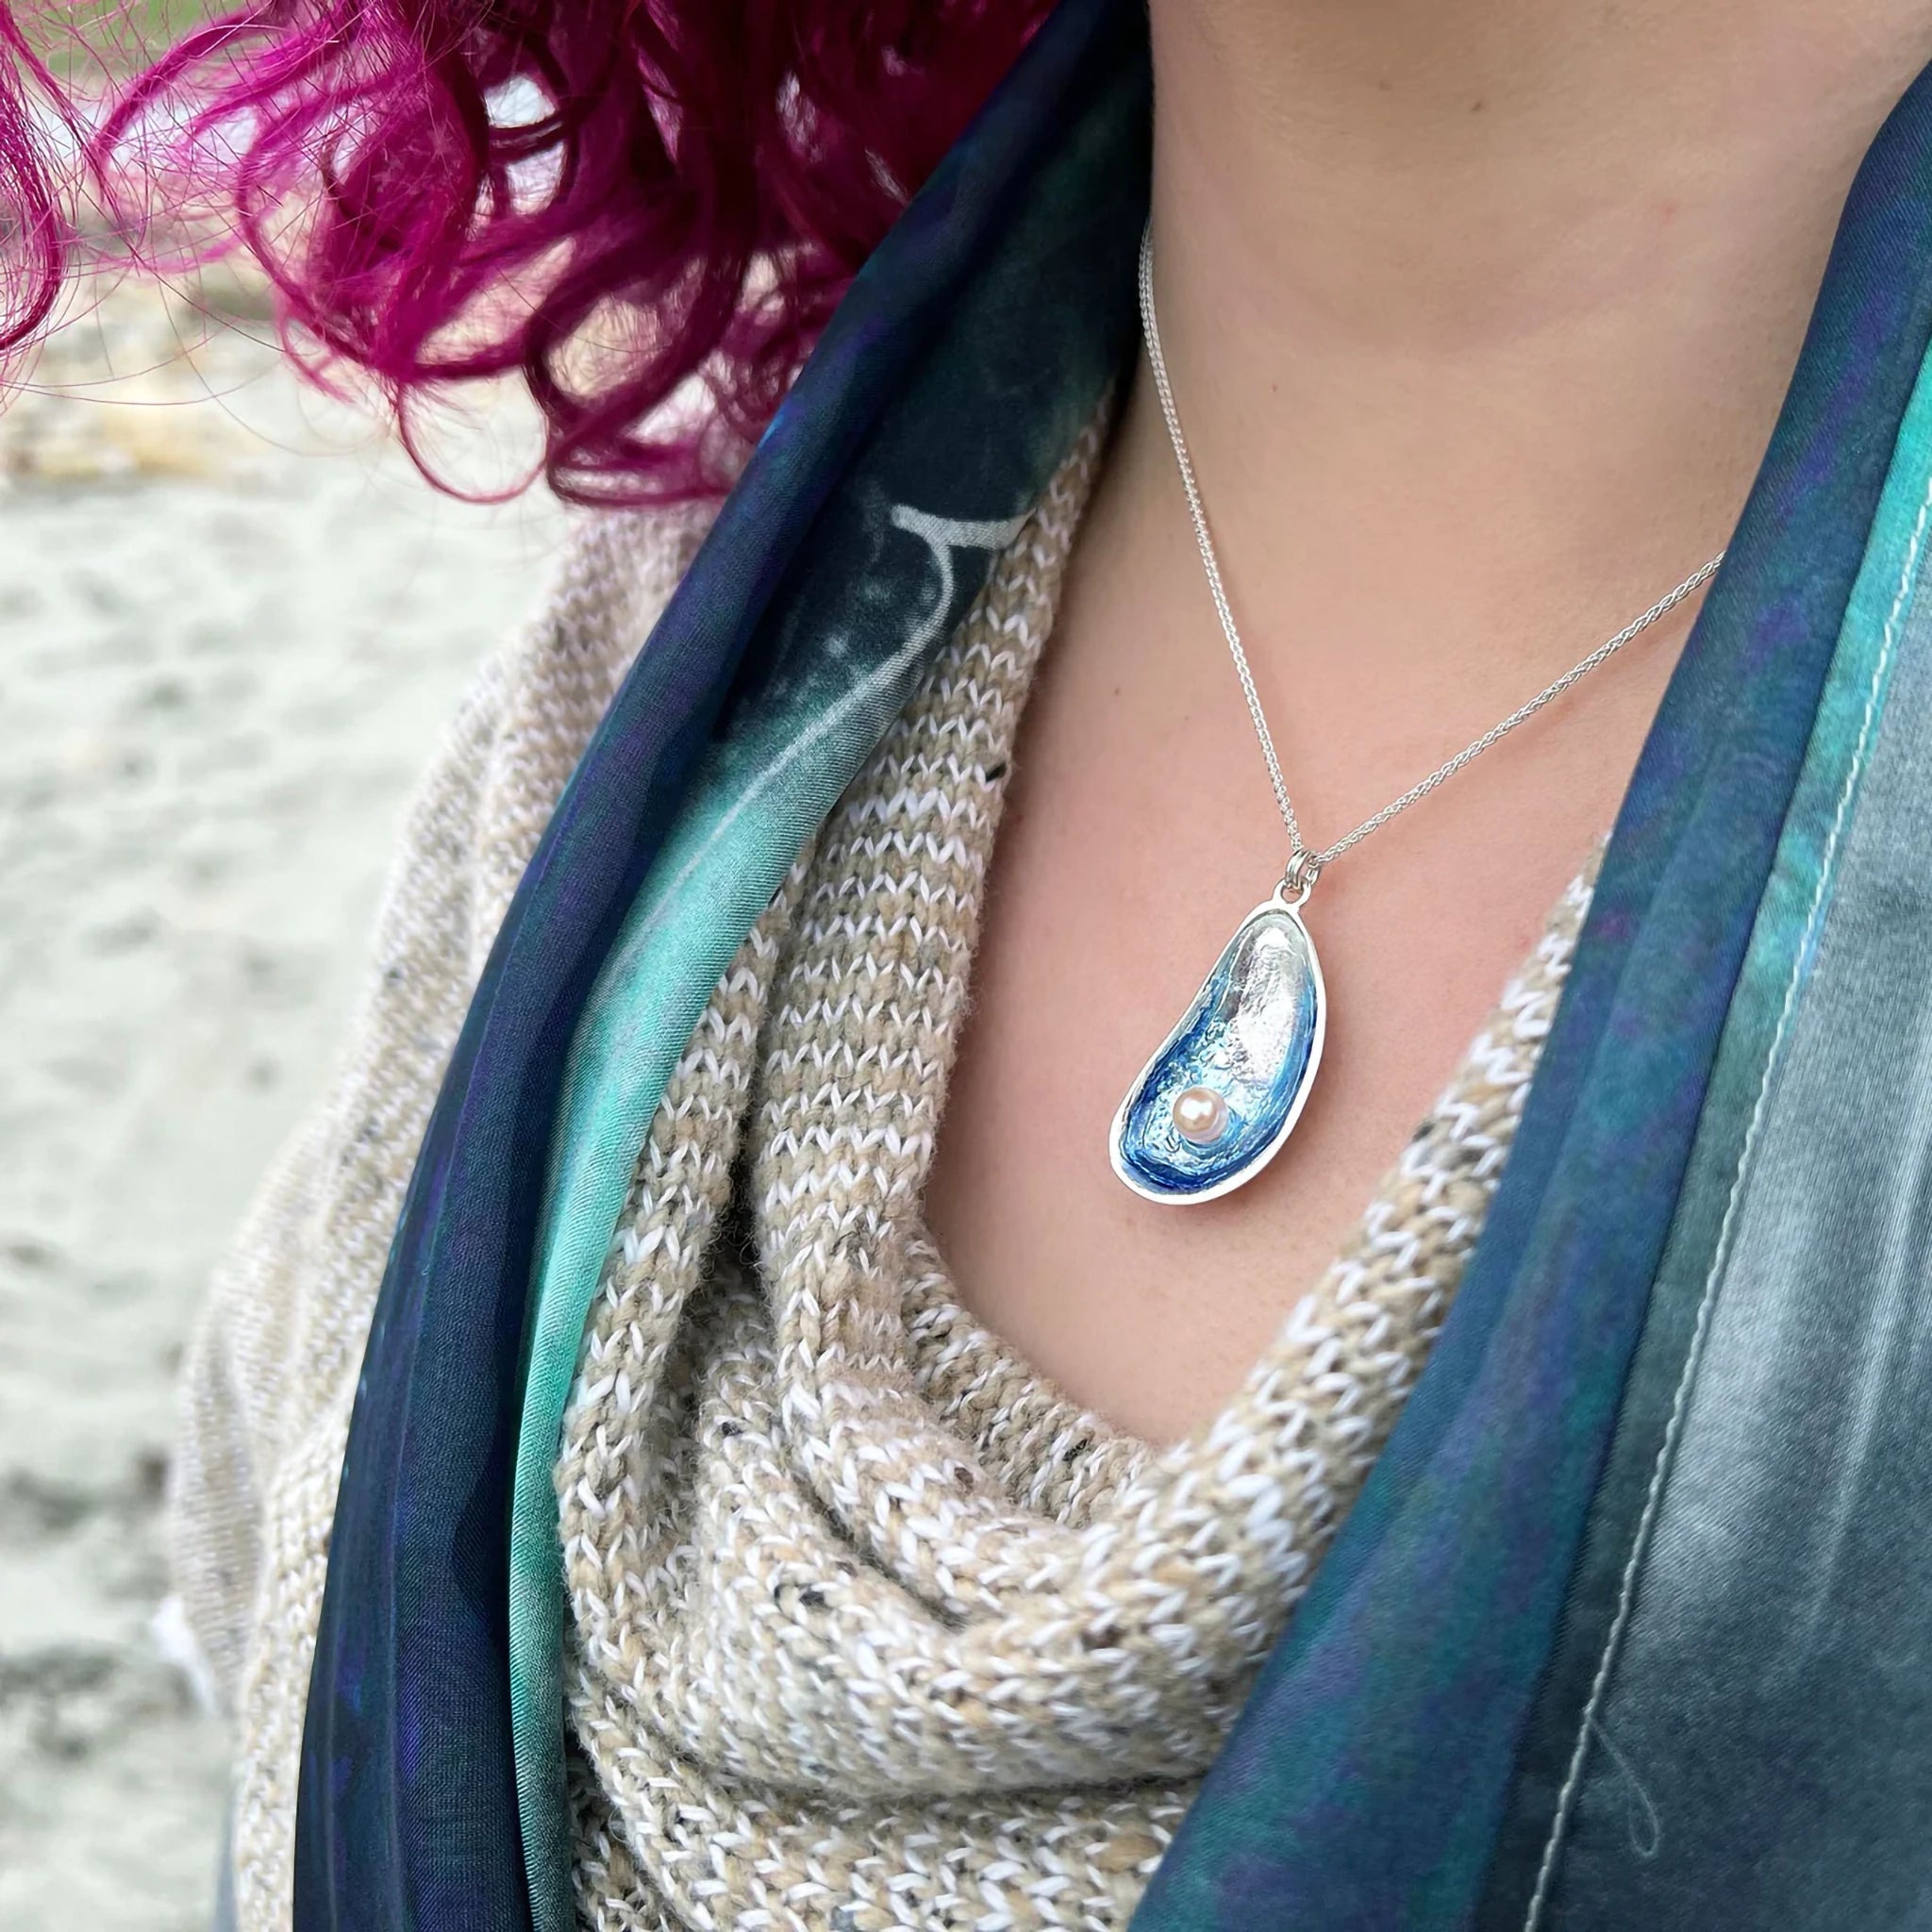 Model wearing a large silver pendant in the shape of a mussel with gradient blue enamel and a pearl on a chain